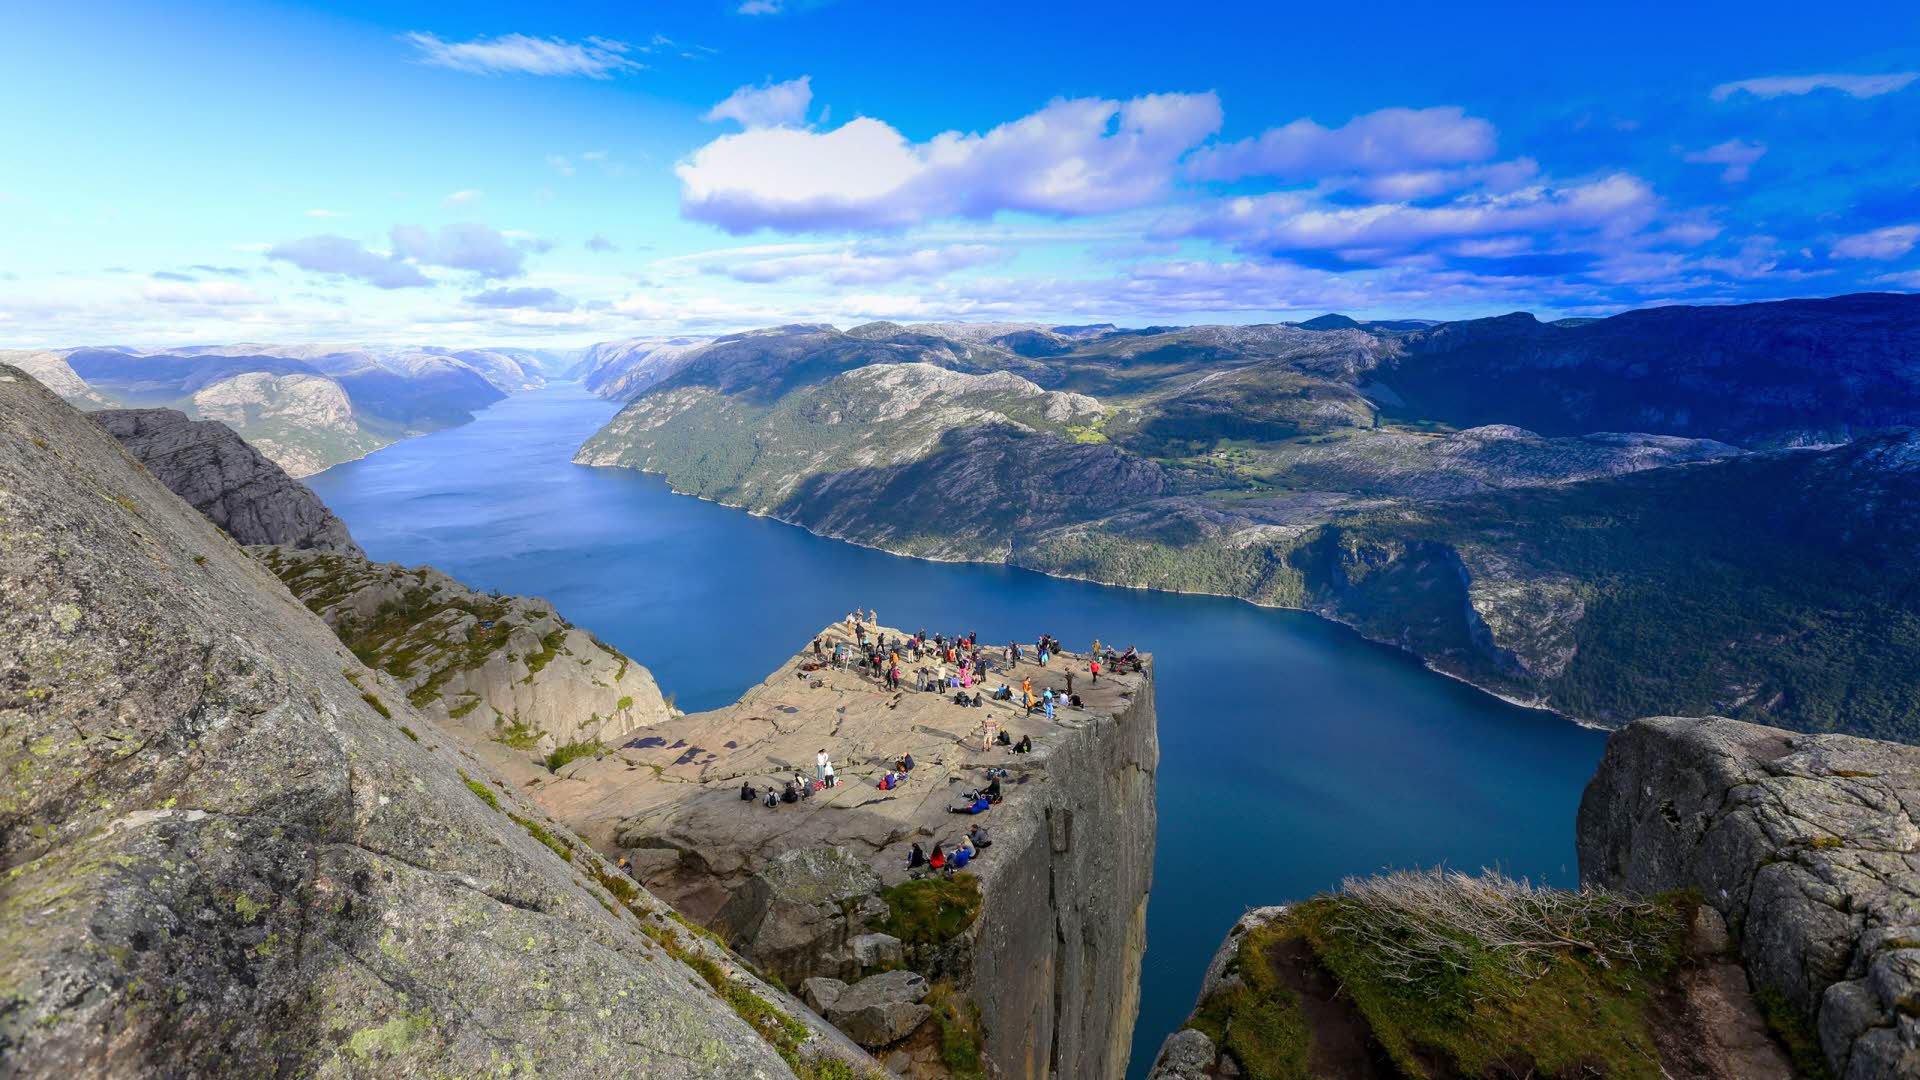 Panorama view from above Pulpit Rock, crowd of people standing near edge. Lysefjord can be seen as stretching out to infinity